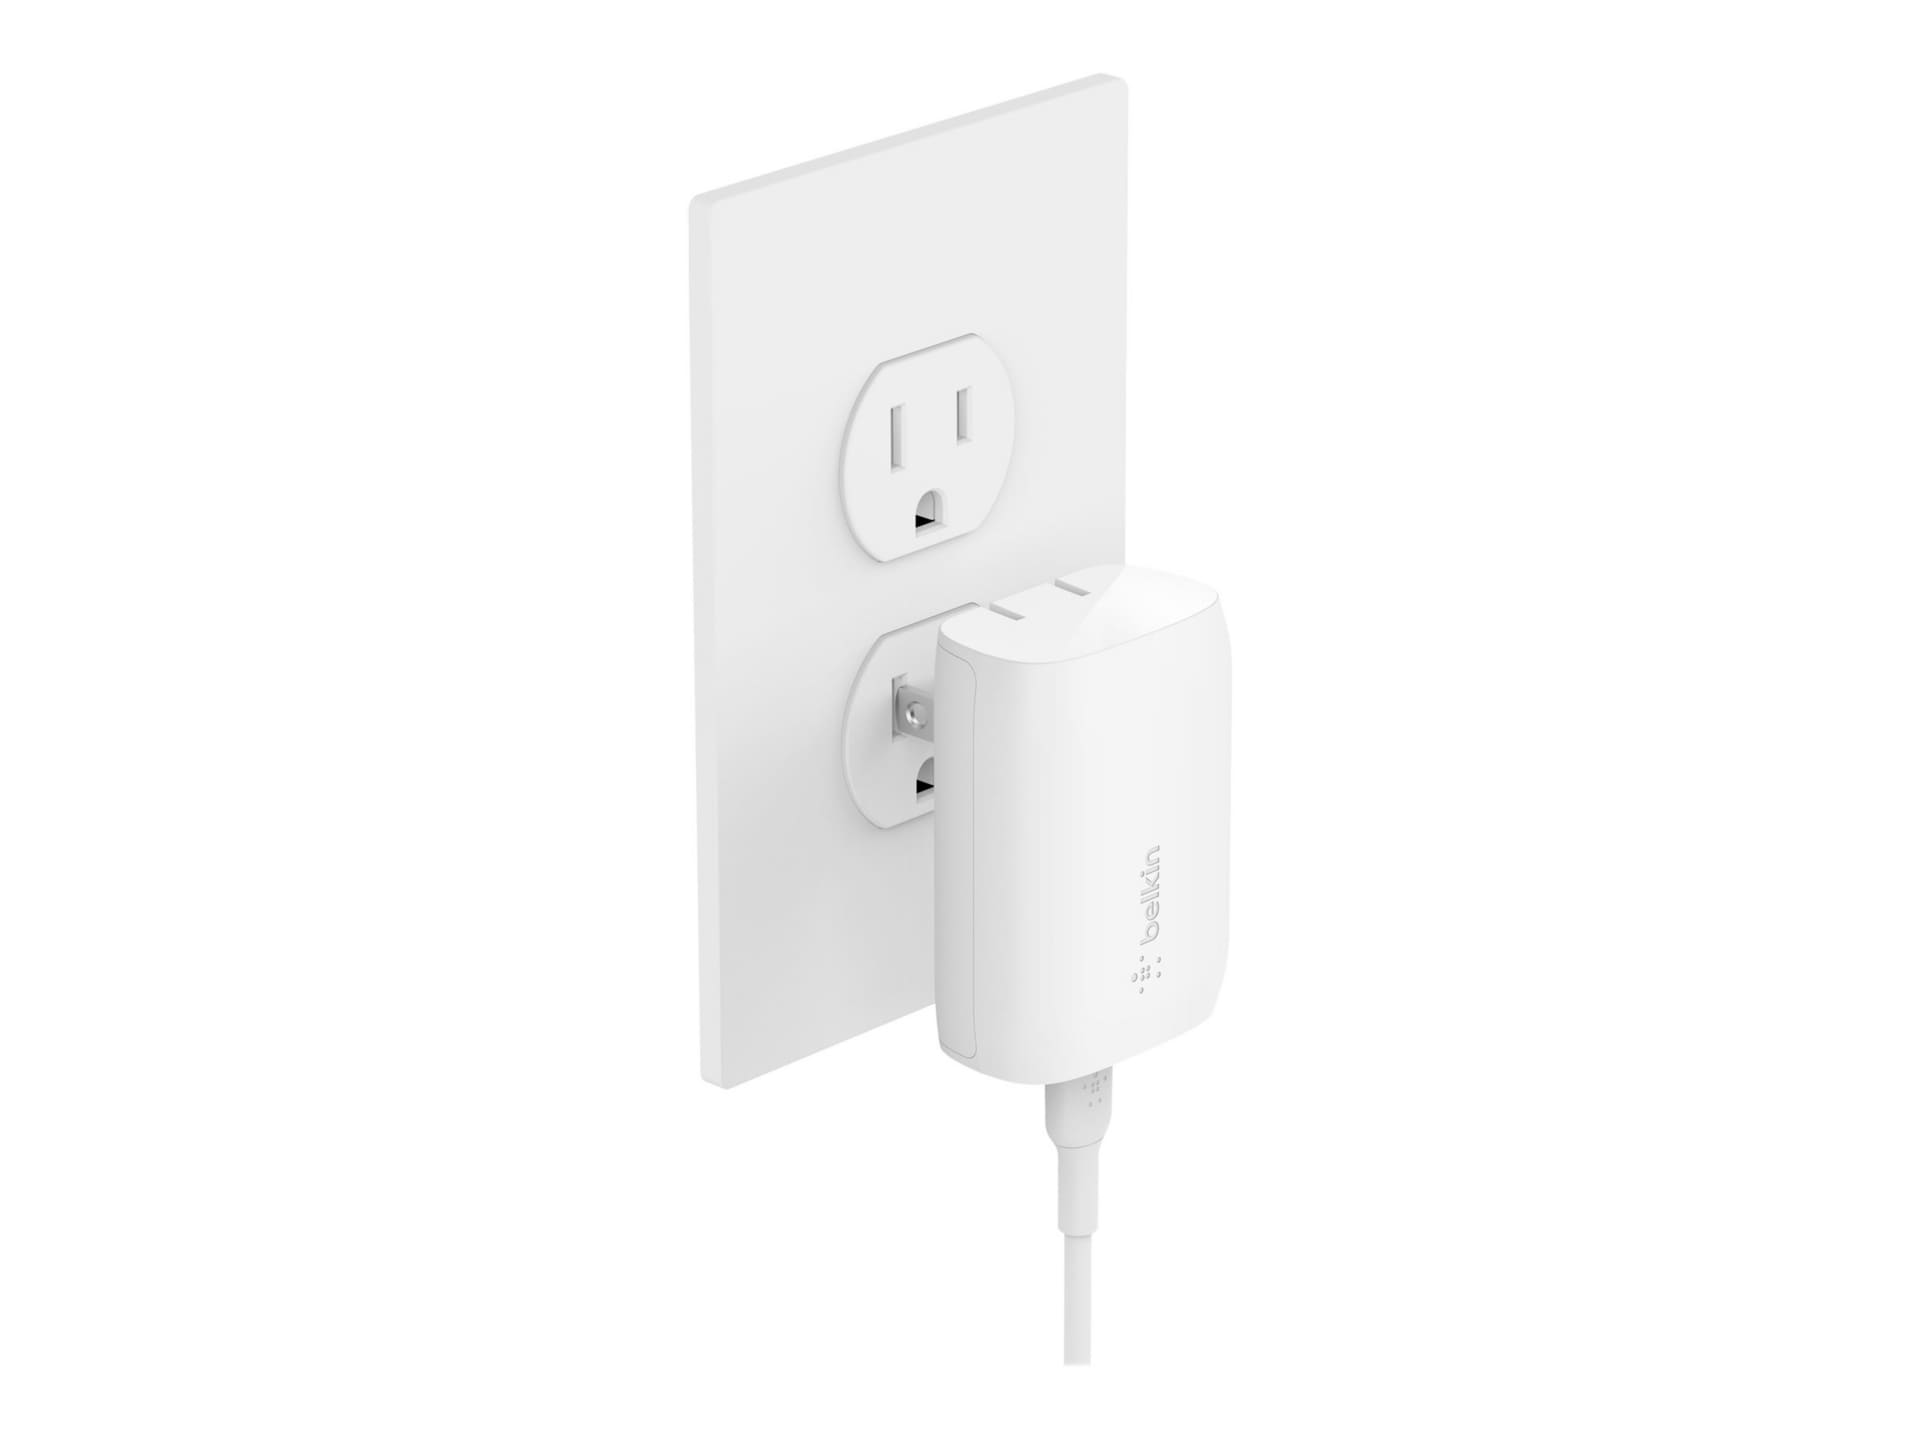 Belkin 30W Portable USB-C Wall Charger - 1xUSB-C - with USB-C to USB-C Cable - Fast Charging - Power Adapter - White